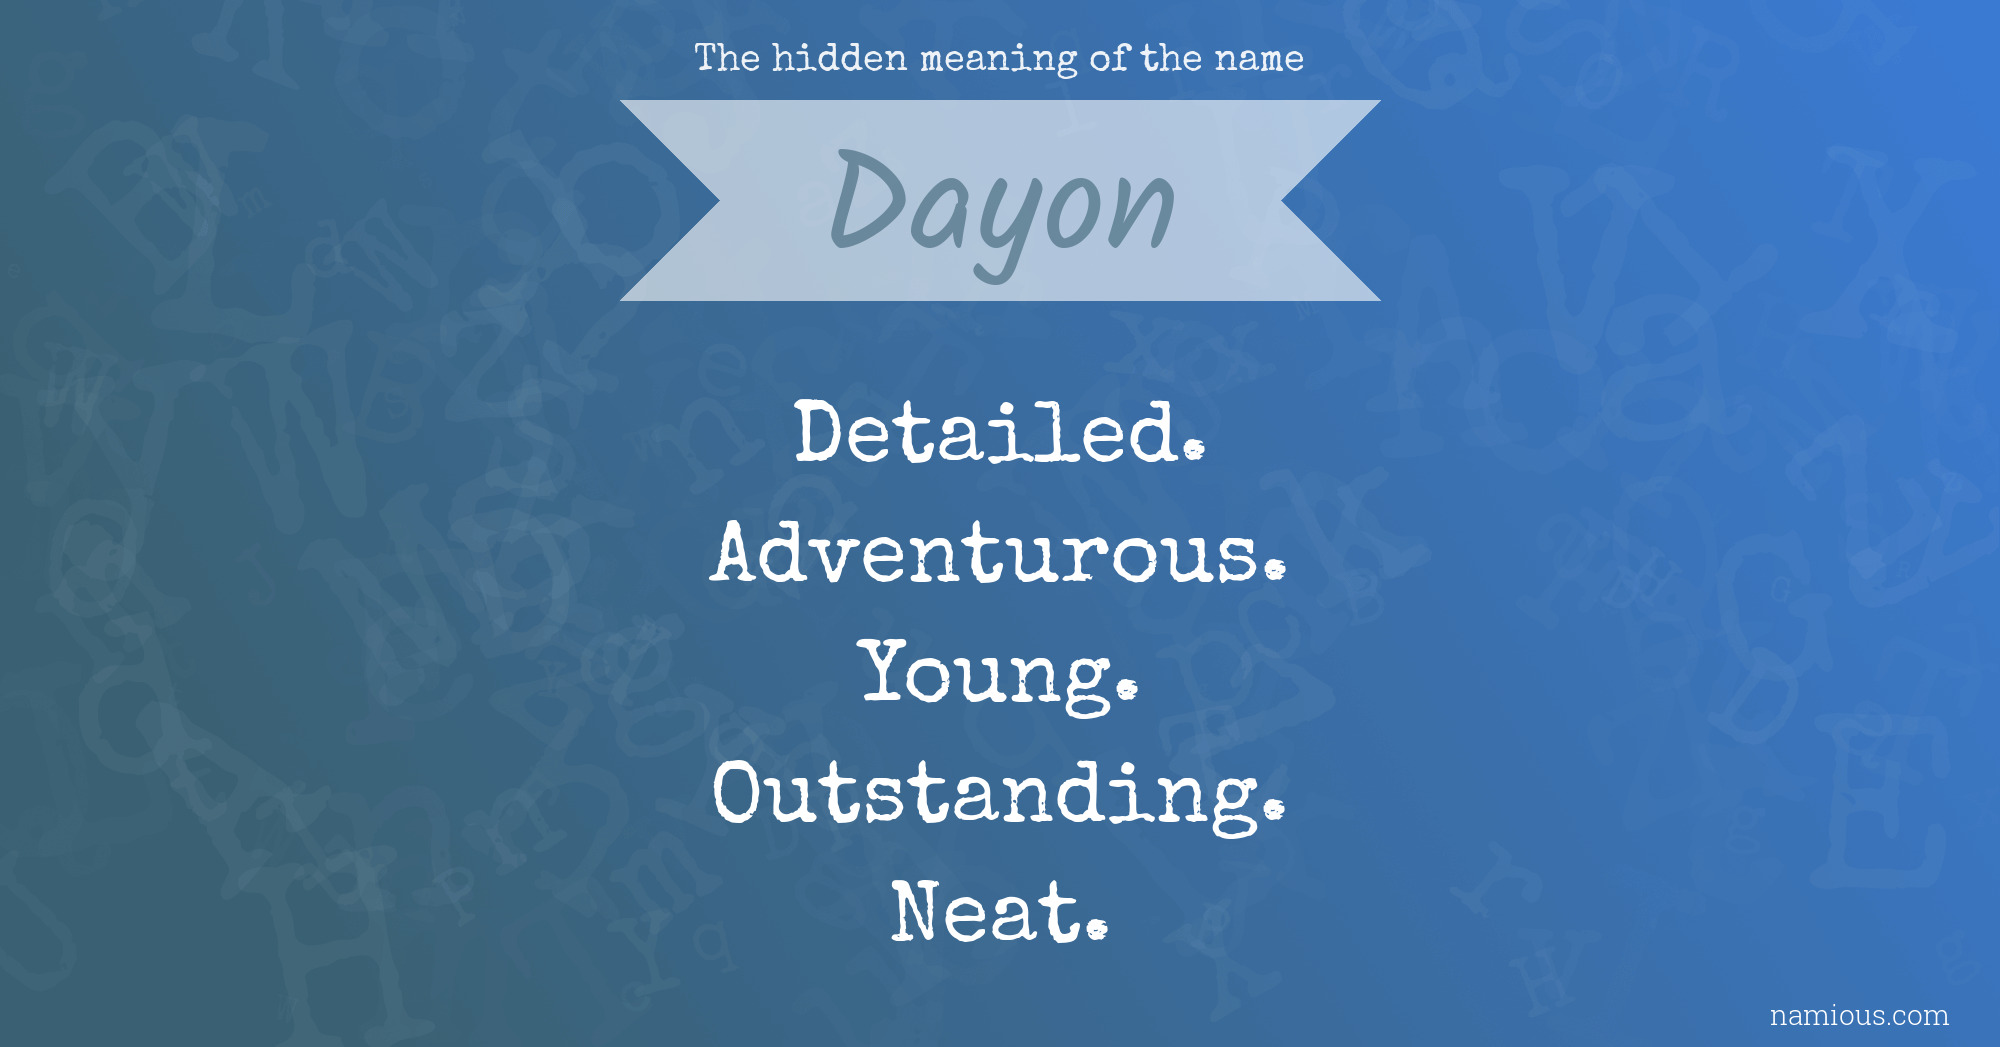 The hidden meaning of the name Dayon